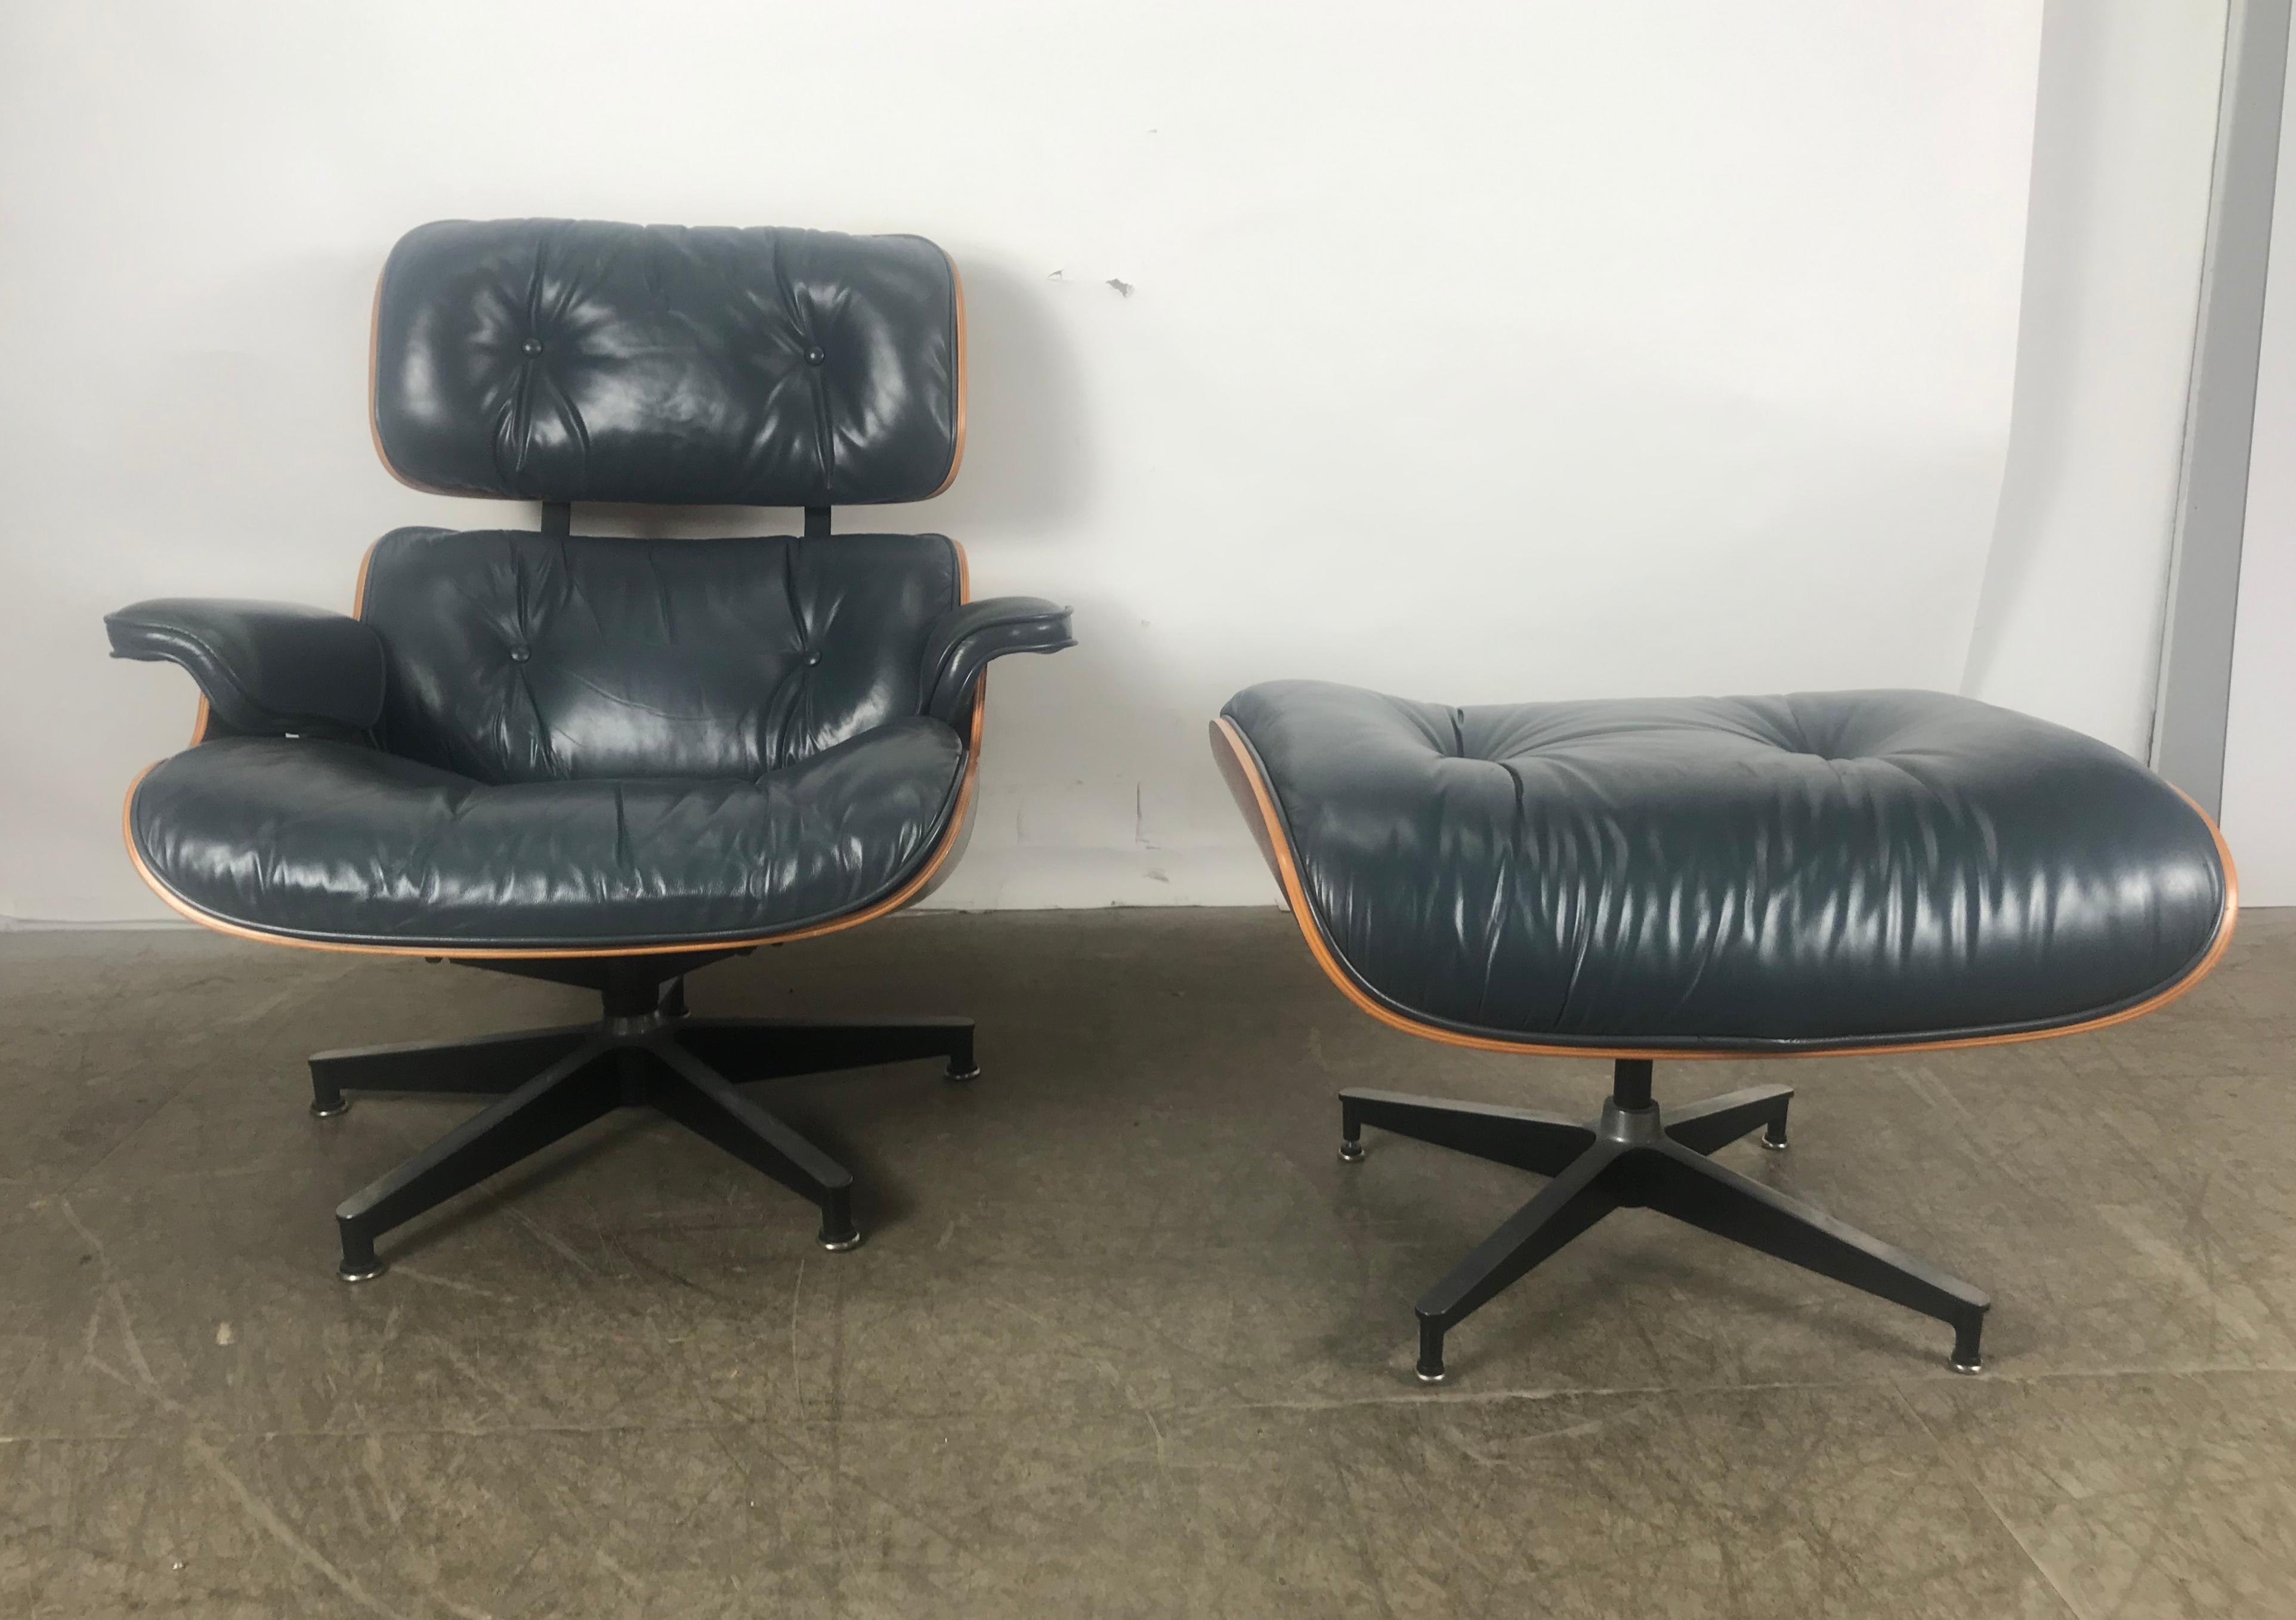 Stunning Custom Order Lounge Chair and Ottoman by Charles Eames, Blue Leather 1